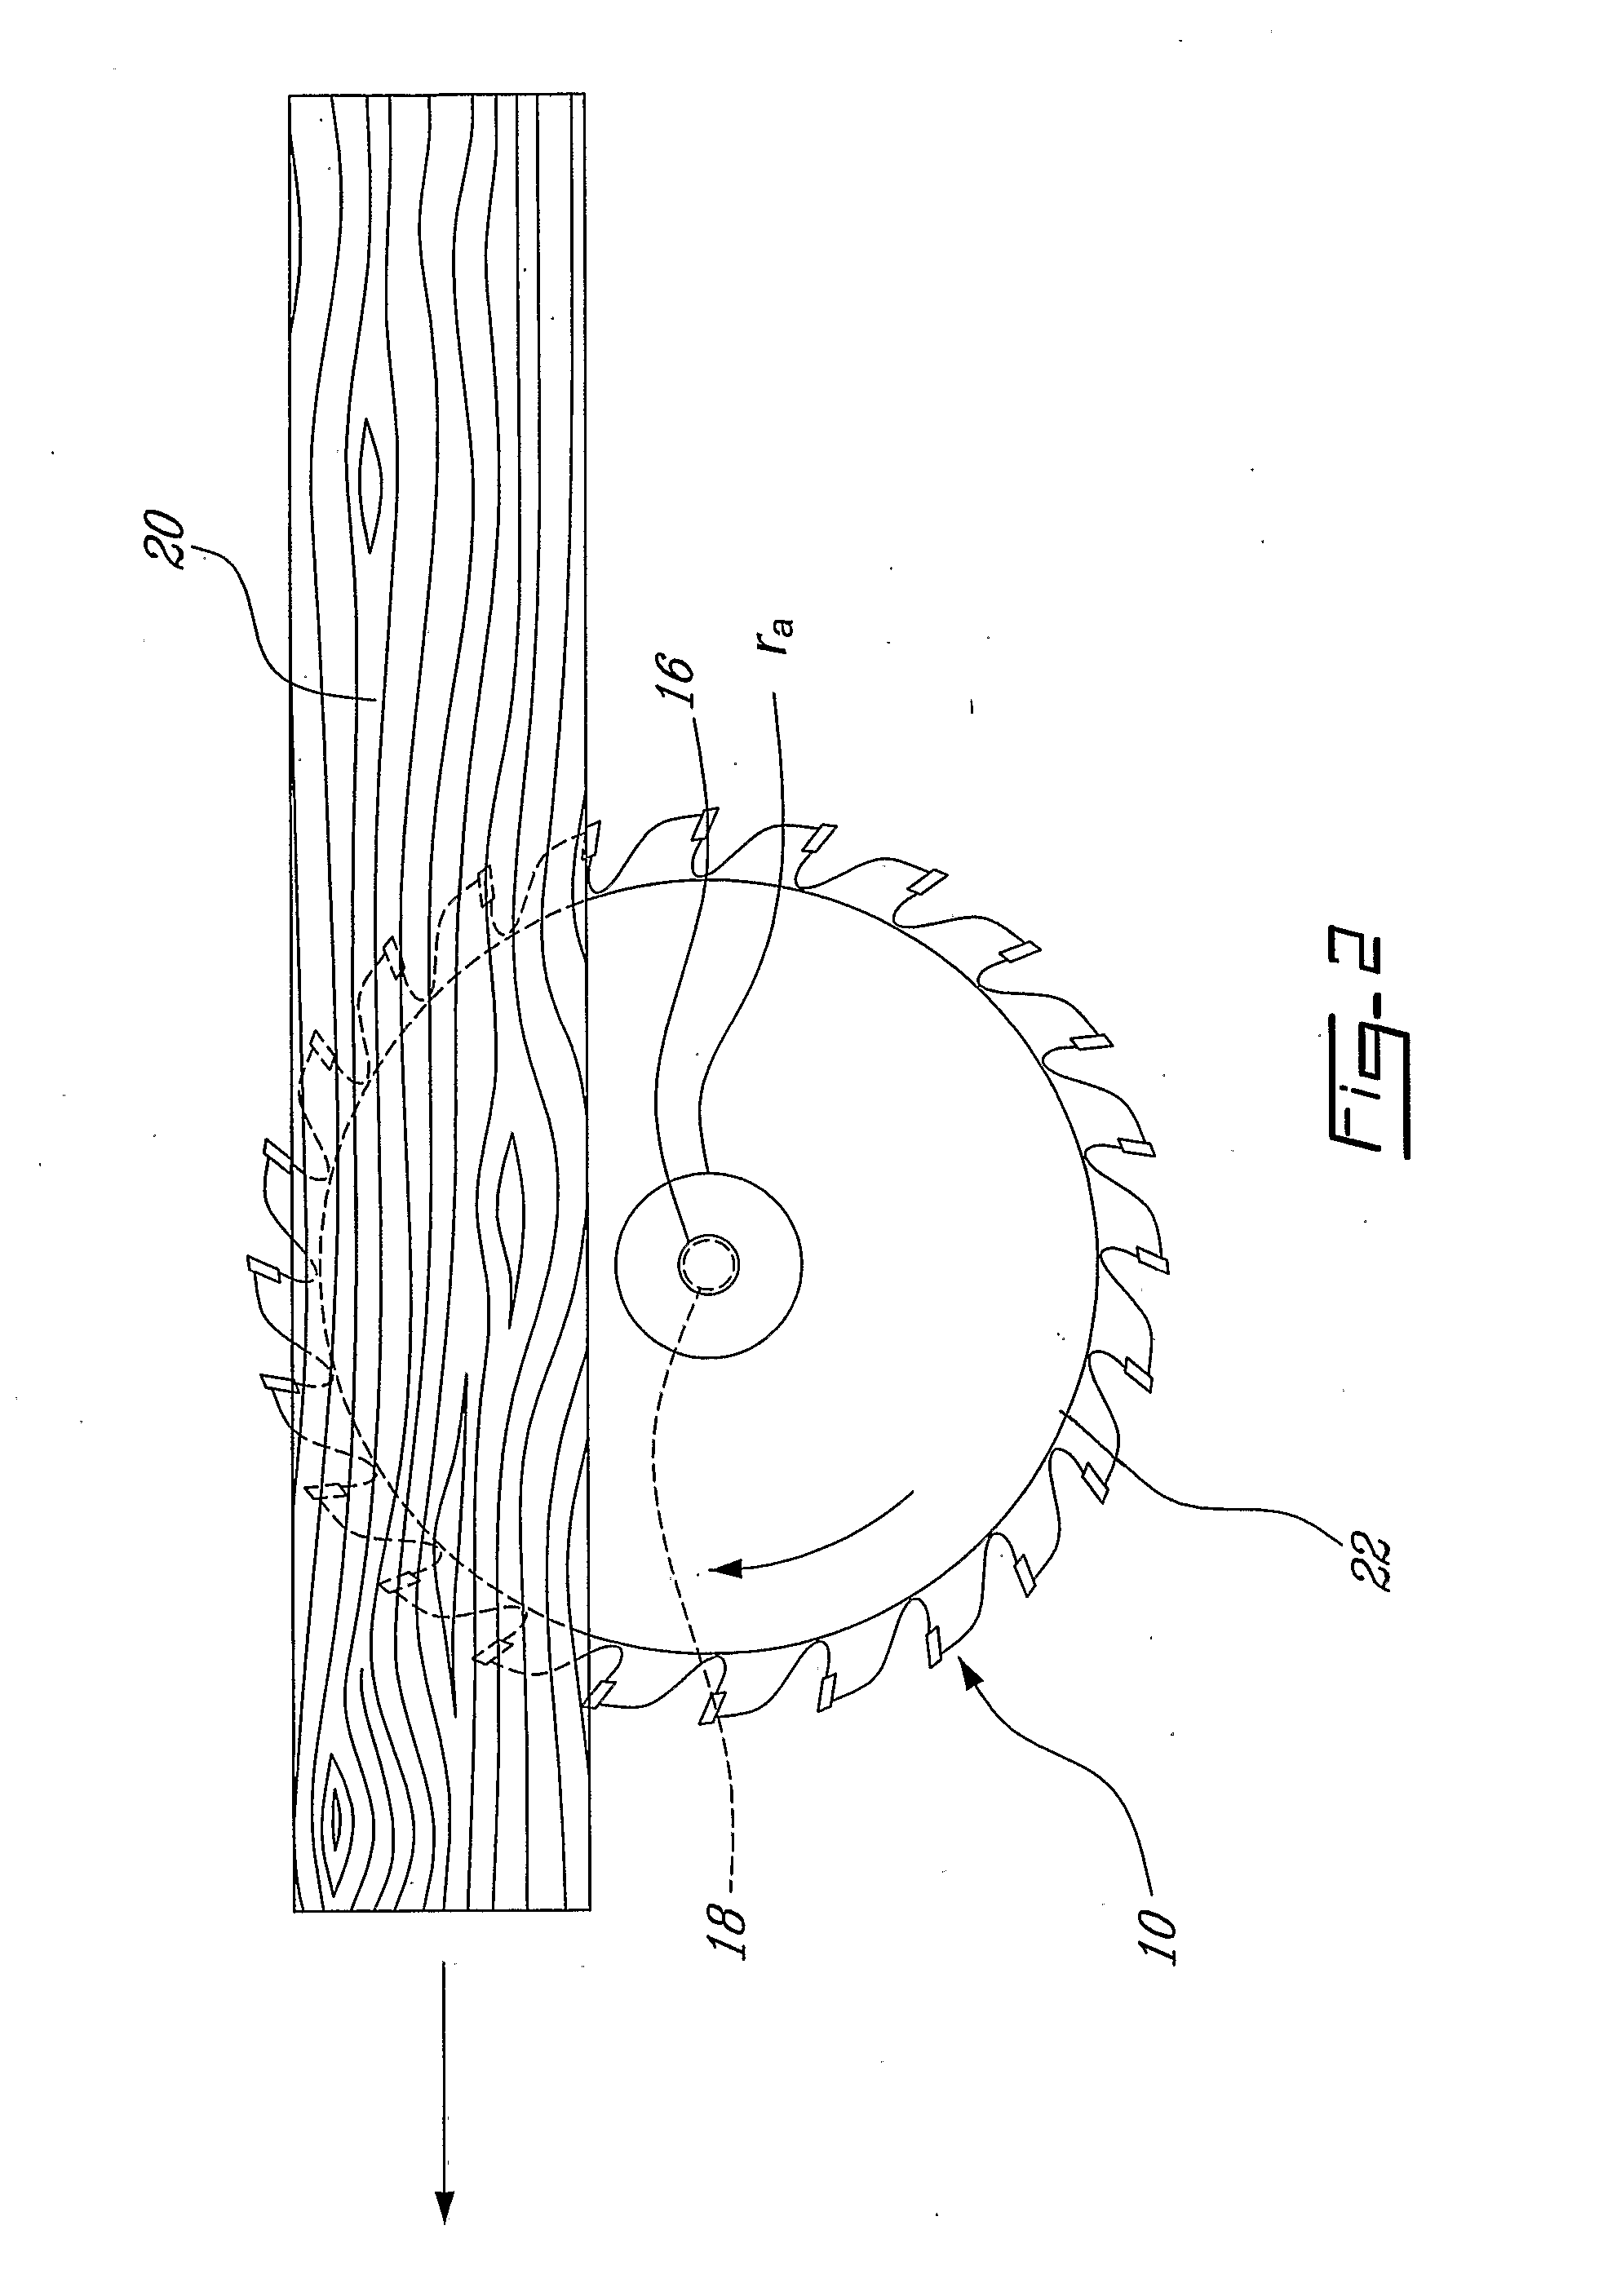 Method and Mechanism for Increasing Critical Speed in Rotating Disks and Reducing Kerf at High Speeds in Saw Blades